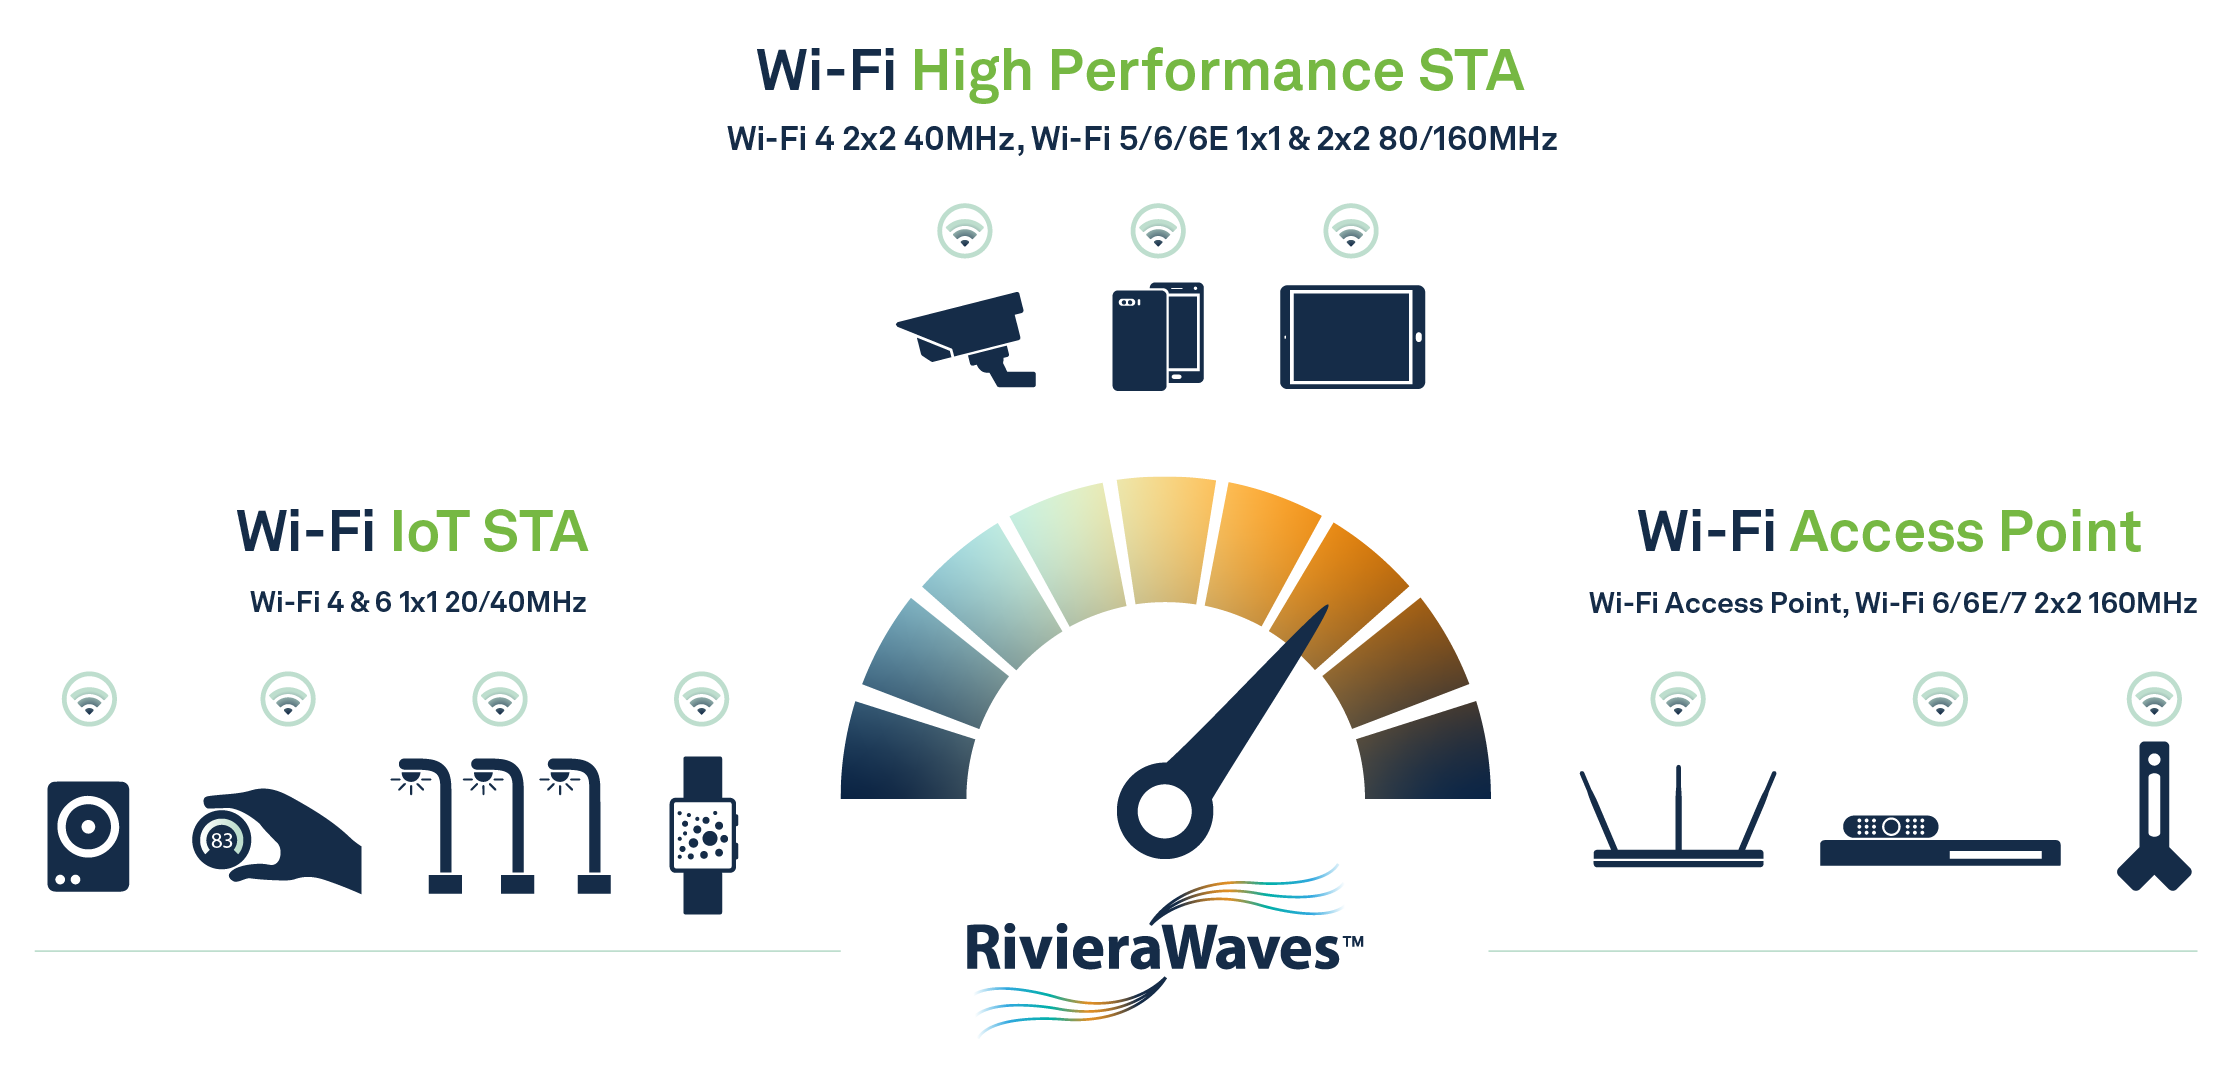 What is Wi FI 7 - Understanding the Latest Wi-Fi Version